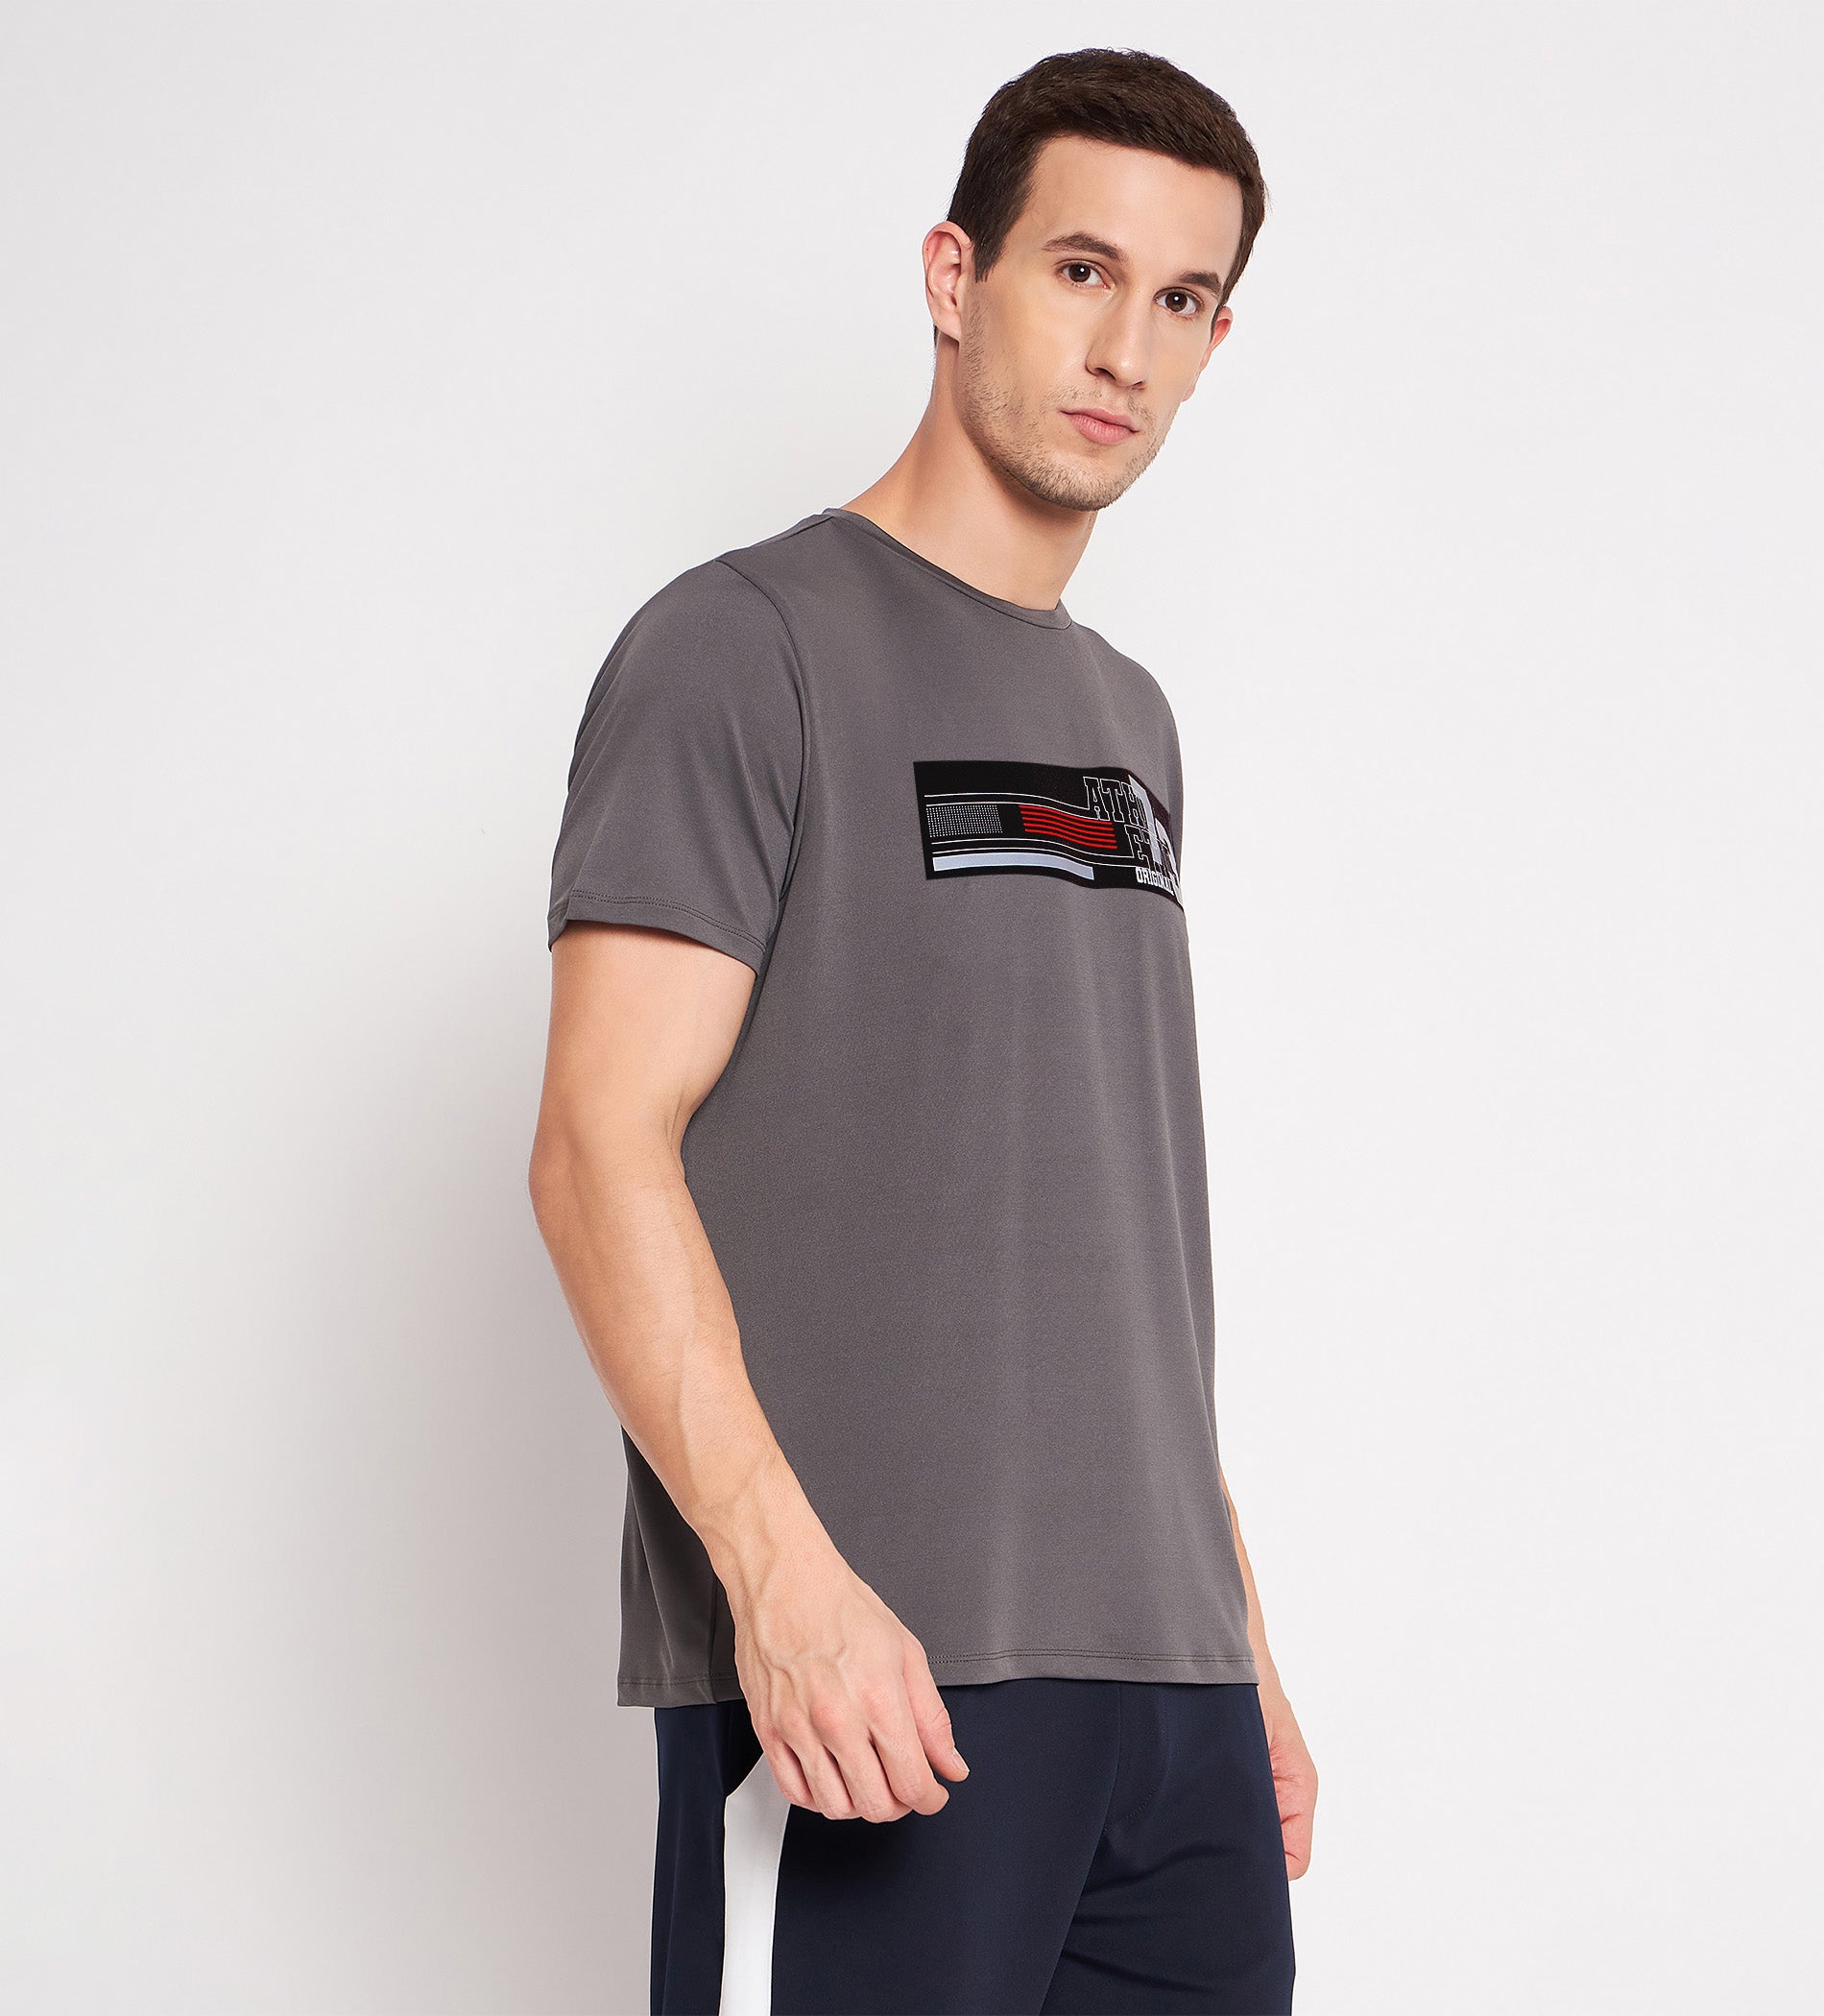 Grey Crew Neck T-Shirt with Chest Print